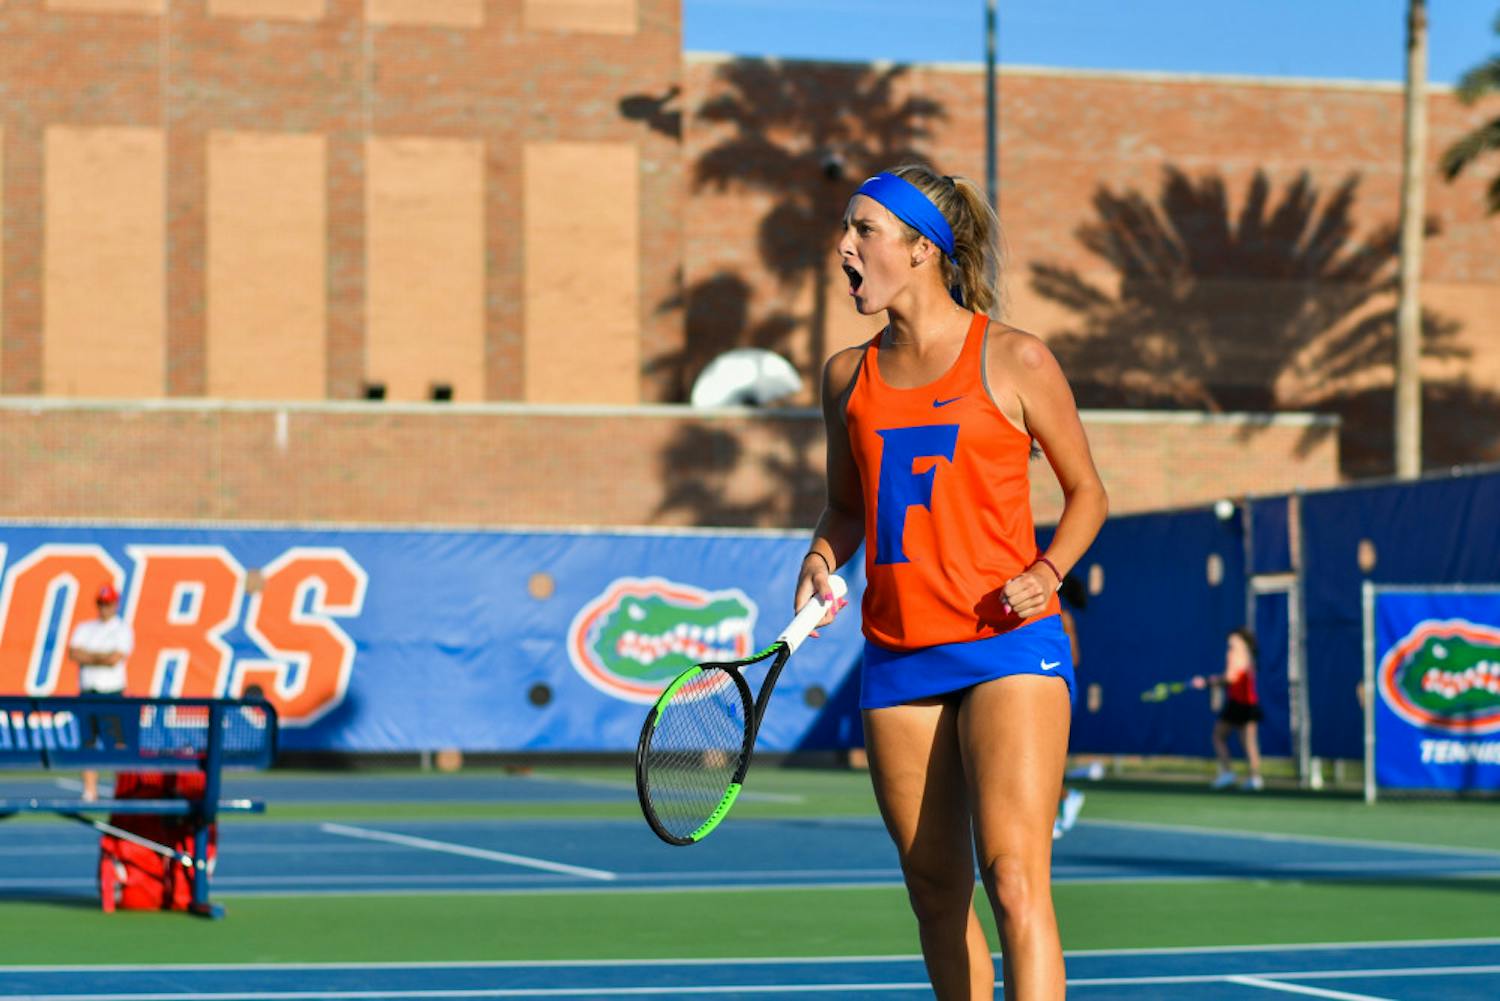 McCartney Kessler will compete in the final of the ITA Southeast Regional Championship in Tallahassee on Monday. She will face off against Georgia’s Lea Ma. Kessler earned two victories on Sunday. 